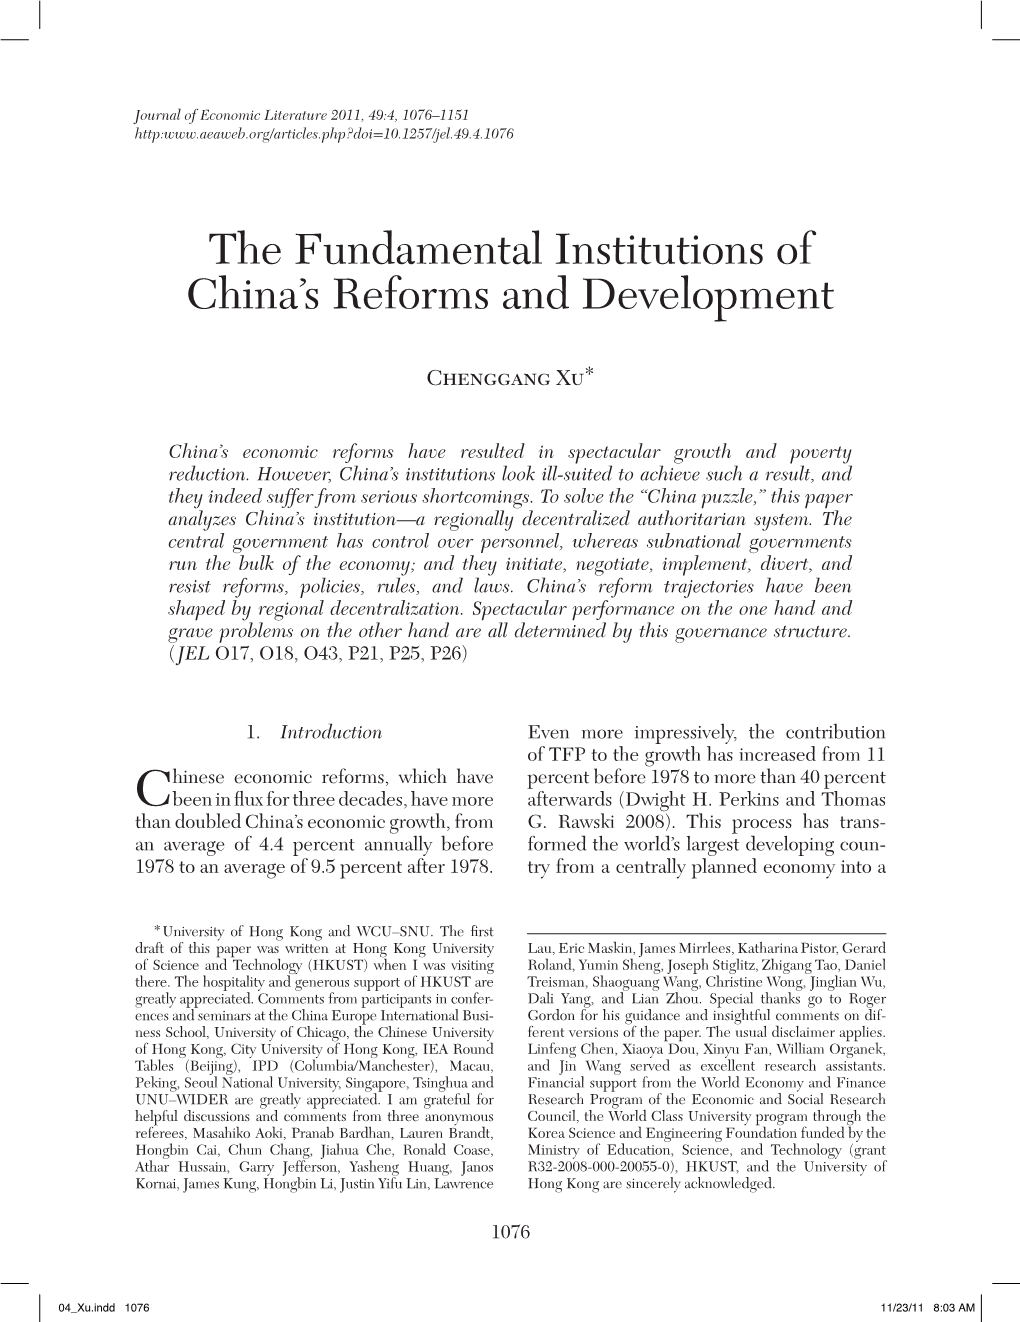 The Fundamental Institutions of China's Reforms And